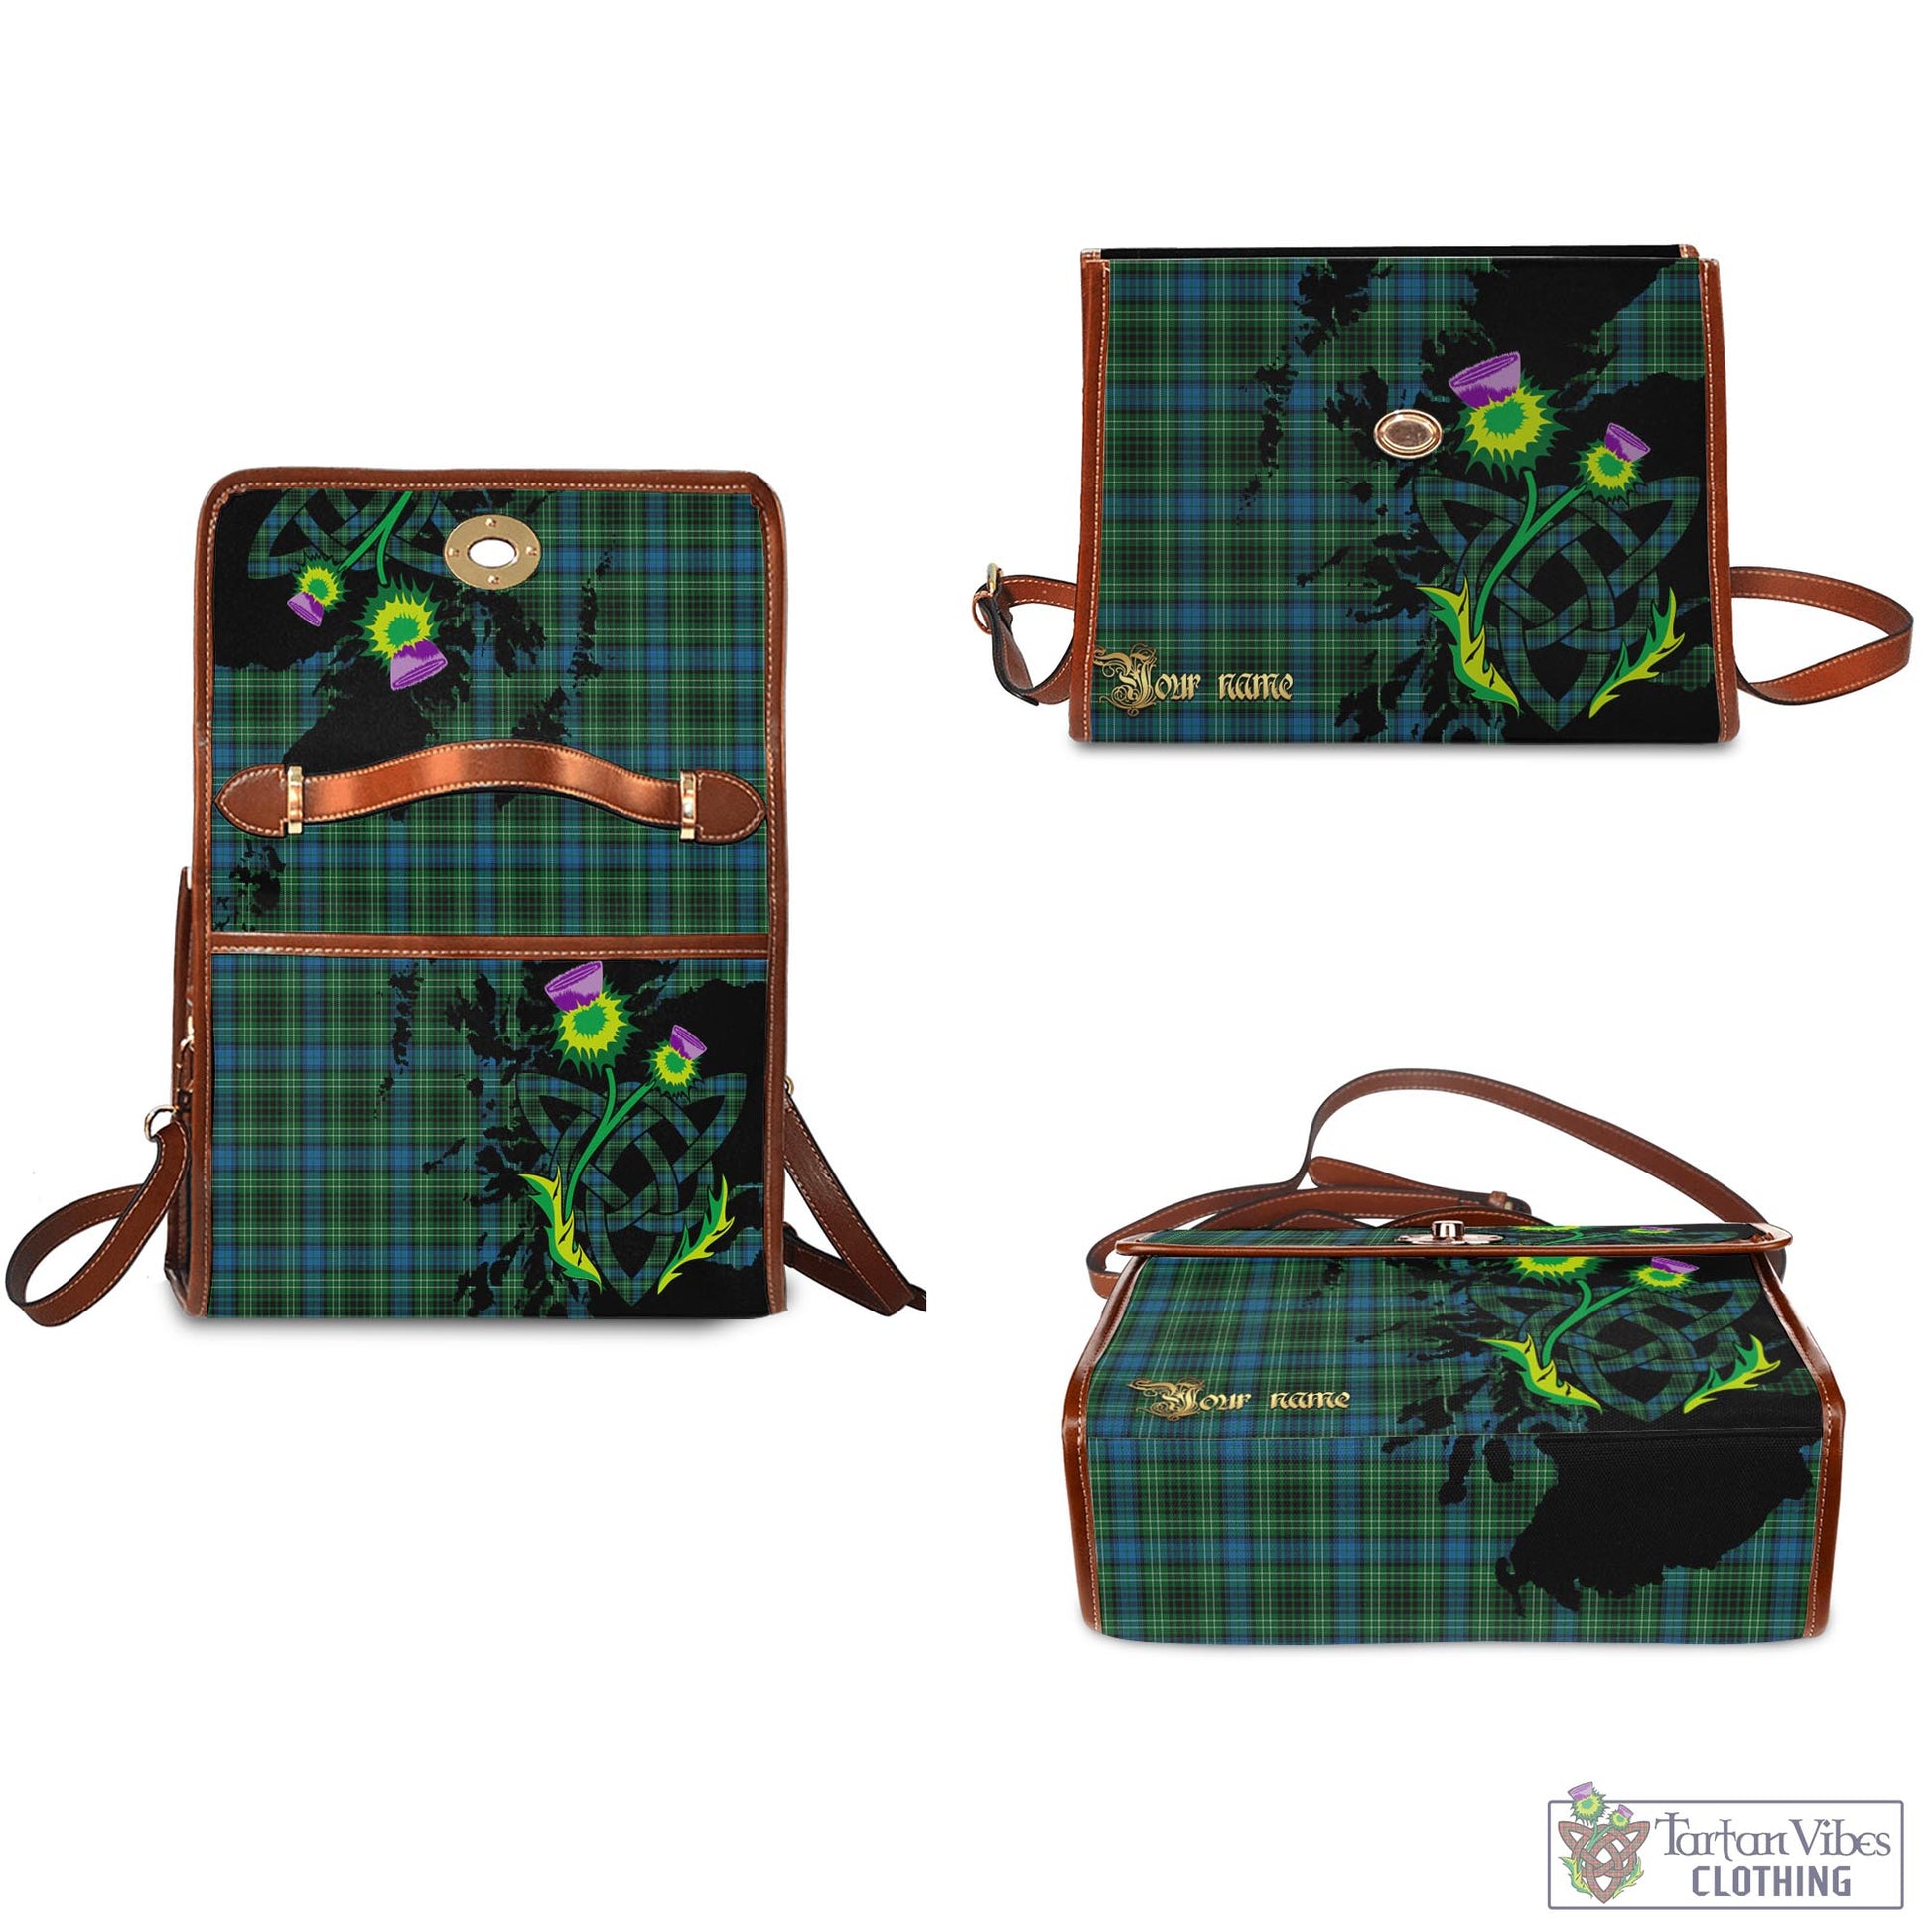 Tartan Vibes Clothing O'Connor Tartan Waterproof Canvas Bag with Scotland Map and Thistle Celtic Accents